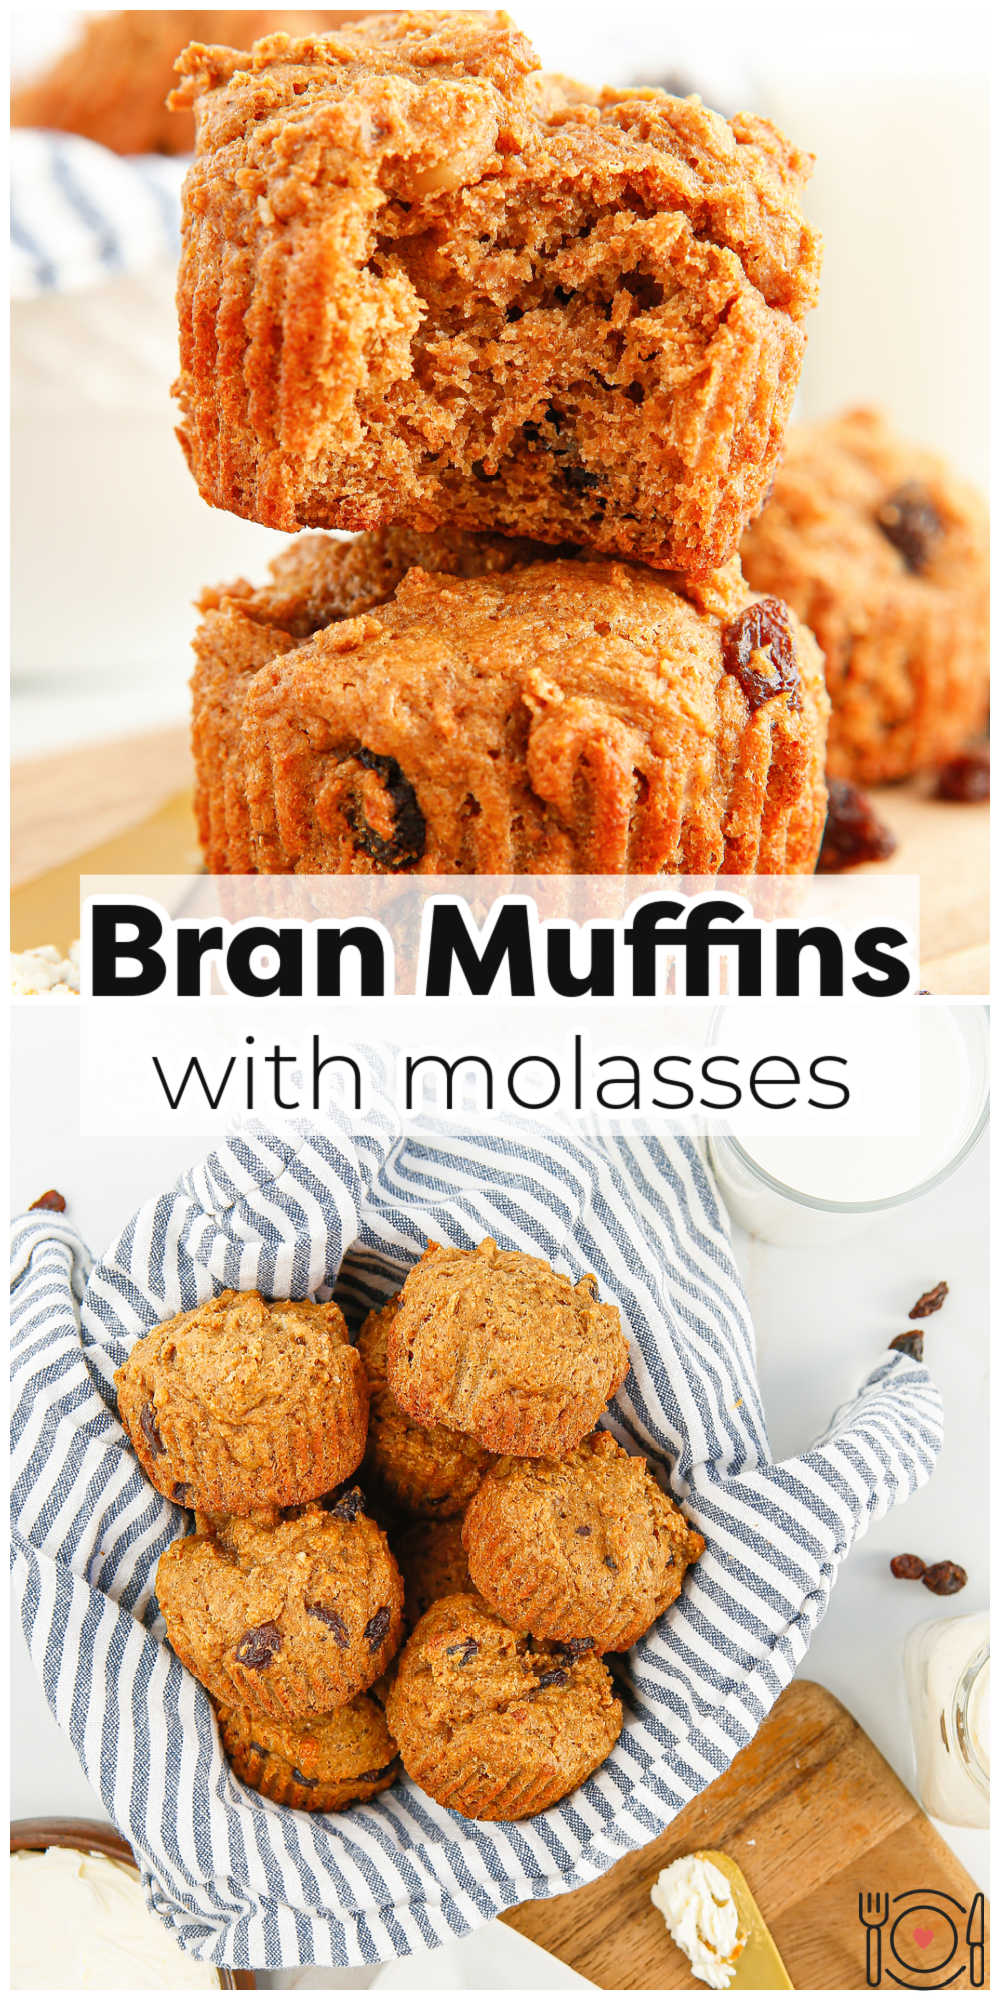 This Bran Muffin Recipe with Molasses and Raisins makes tender and flavorful bran muffins. This recipe will convert any bran muffin hatter into an aficionado! via @foodfolksandfun